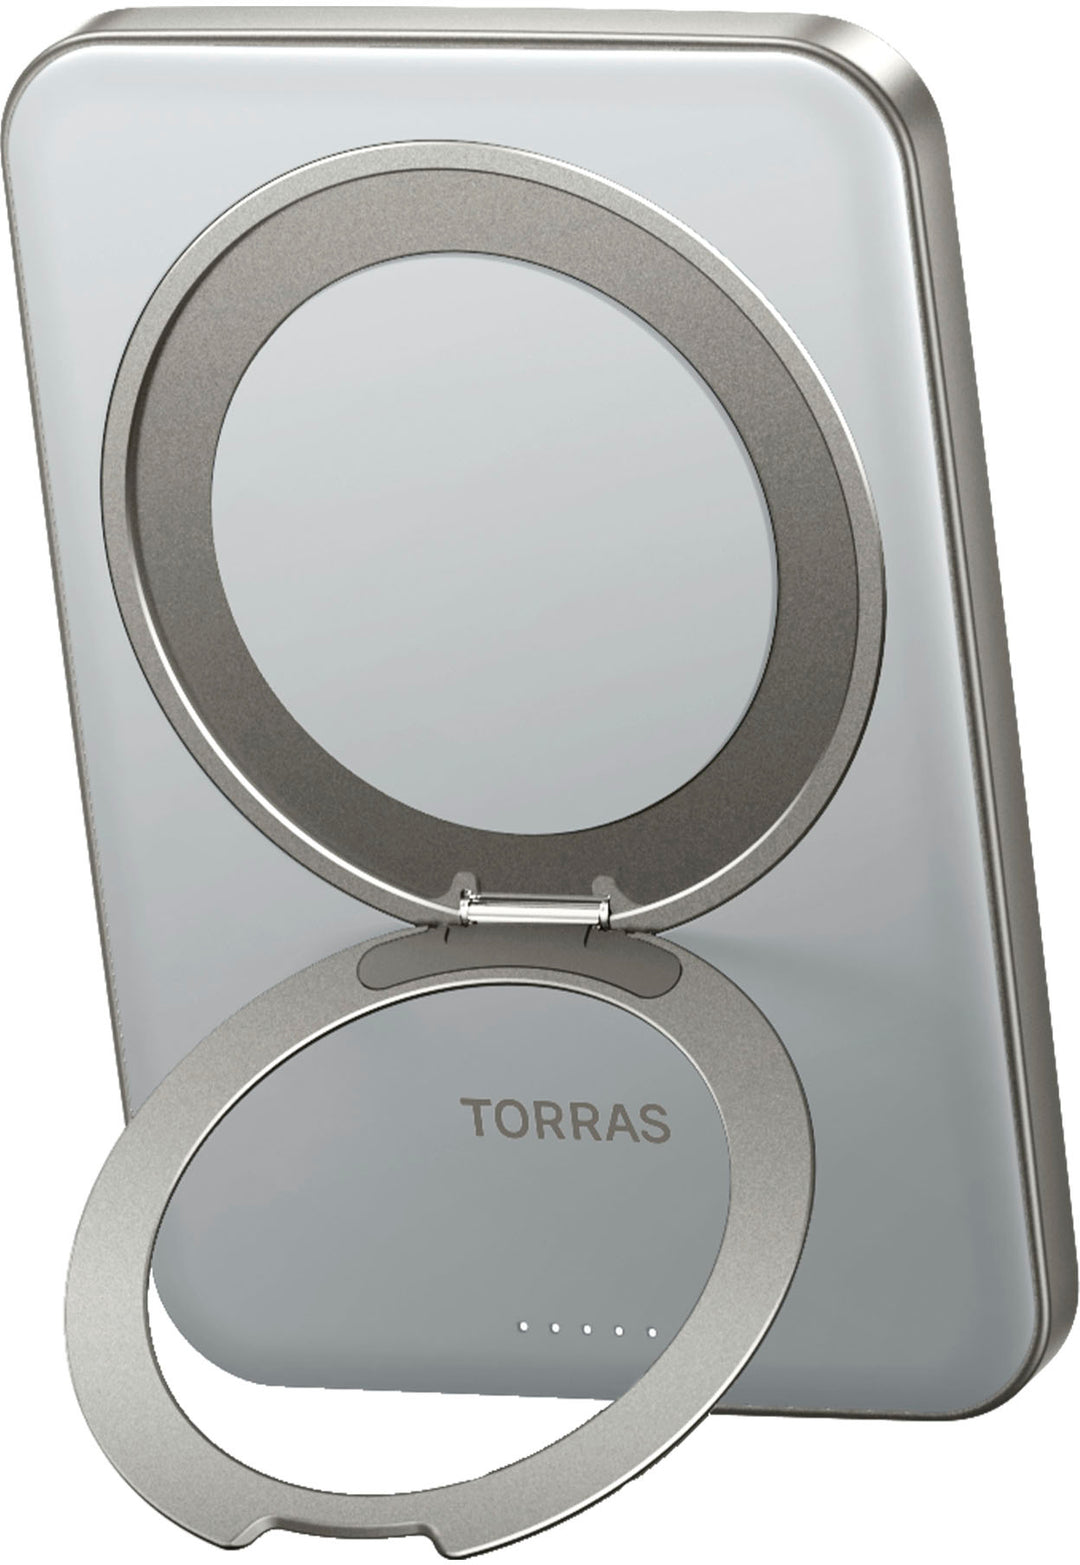 TORRAS - Ostand Magnetic Power Bank 5000mAh with 360° Rotatable Stand - Titanium Gray_0